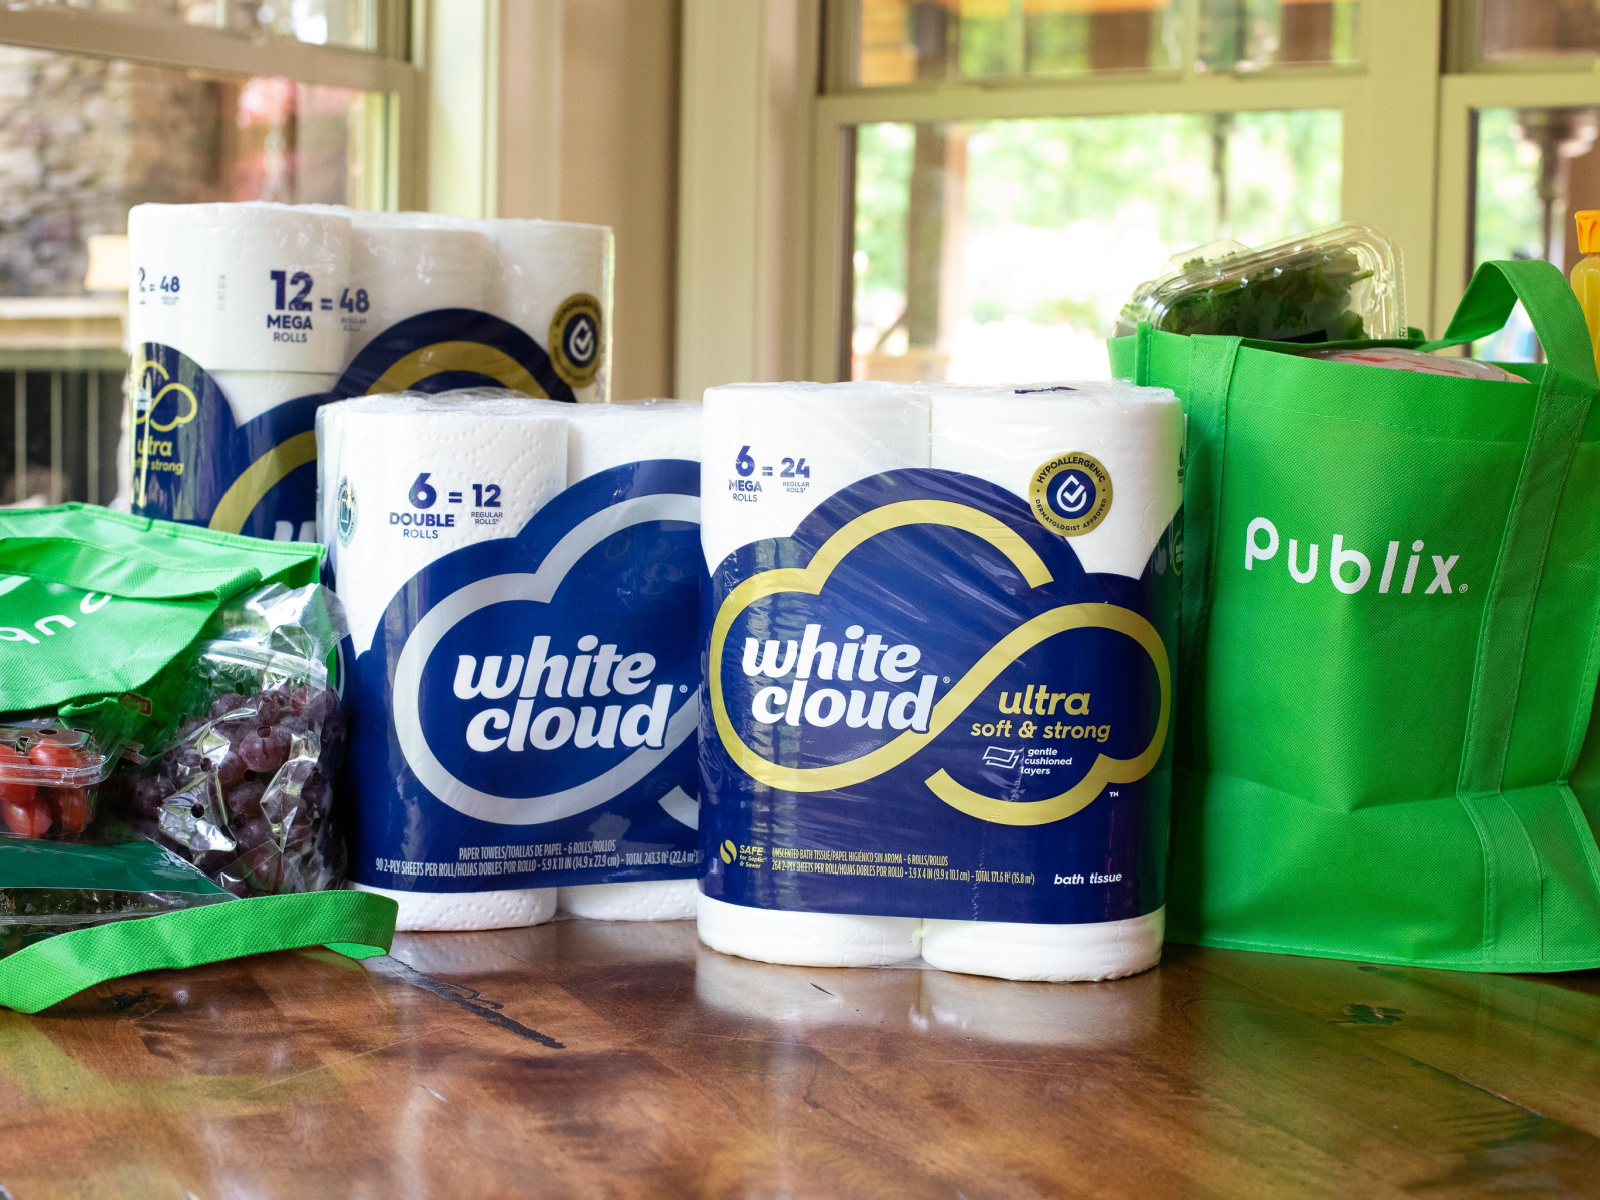 White Cloud® Toilet Paper & Paper Towels Now Available At Publix – Big Savings On Premium Quality Products You’ll Love!